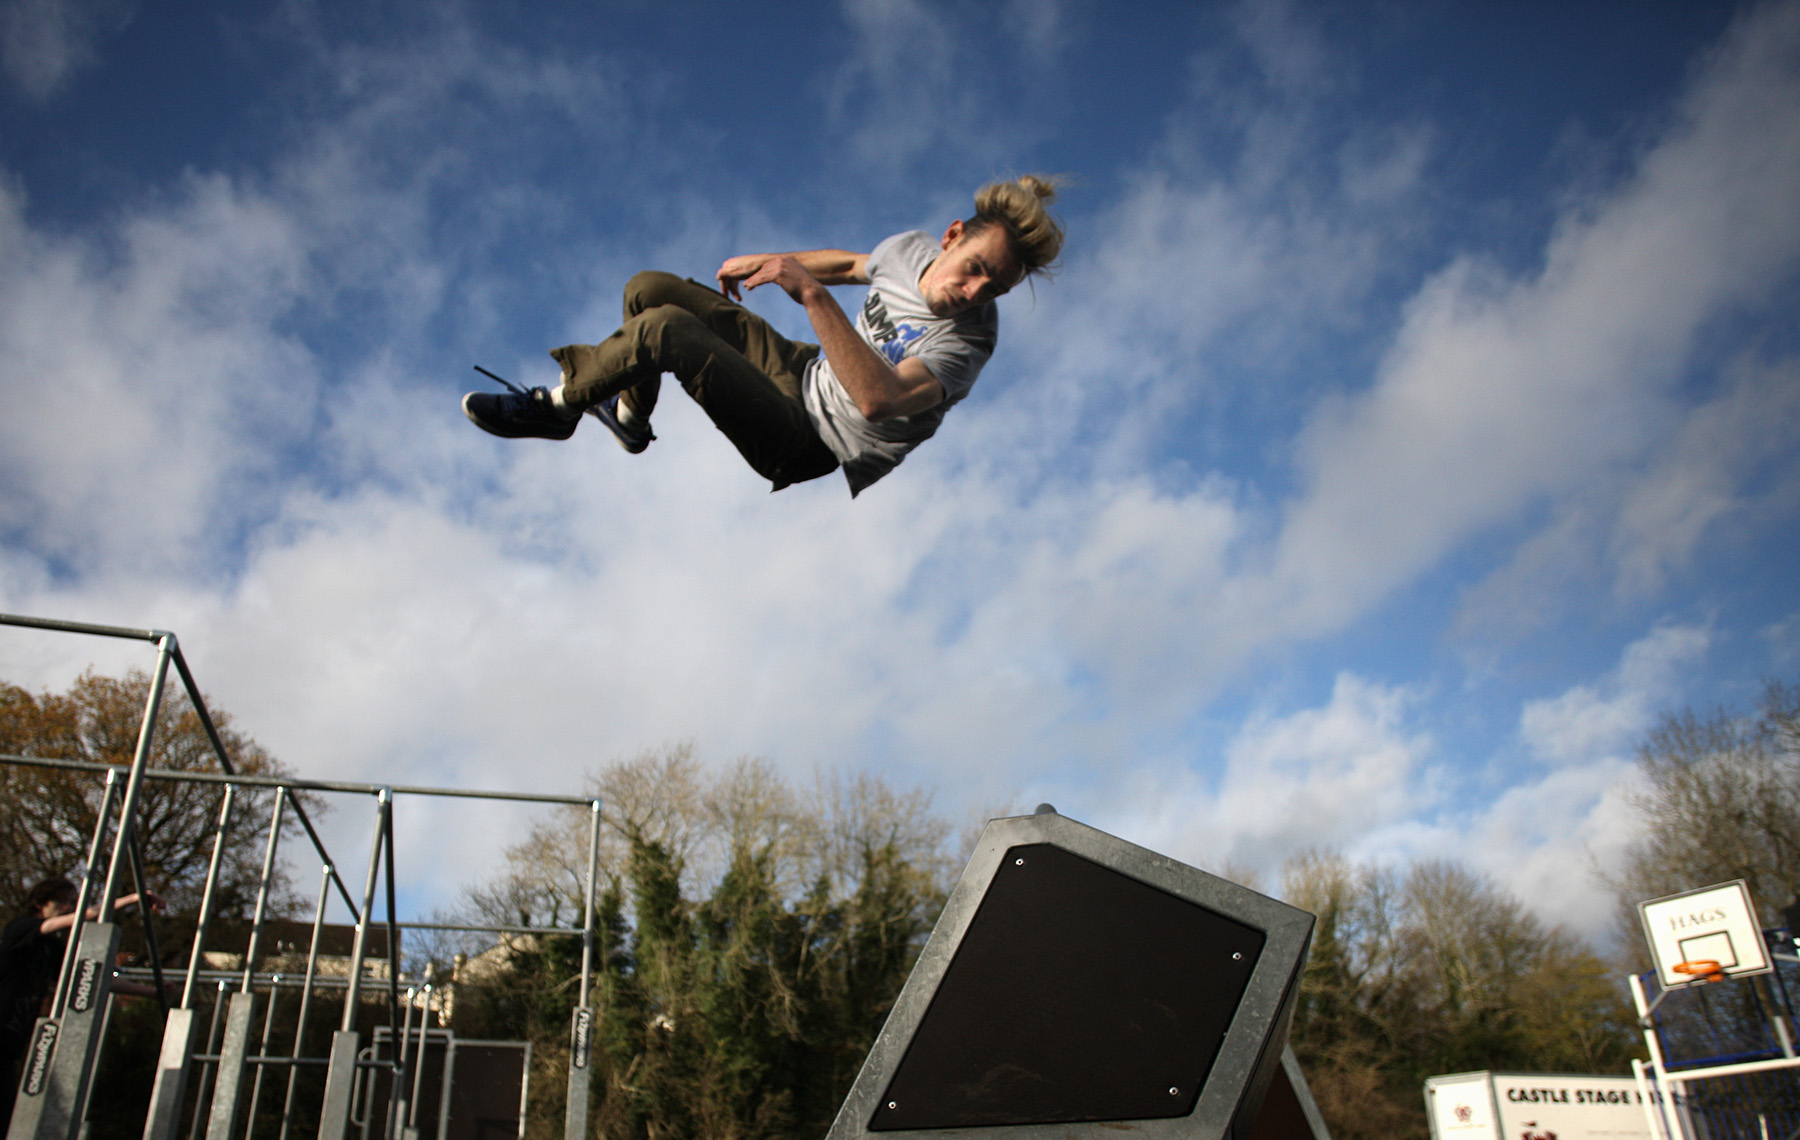 UP IN THE AIR: Young people from Springbank Industrial Estate based The Playground gave a Parkour demonstration 